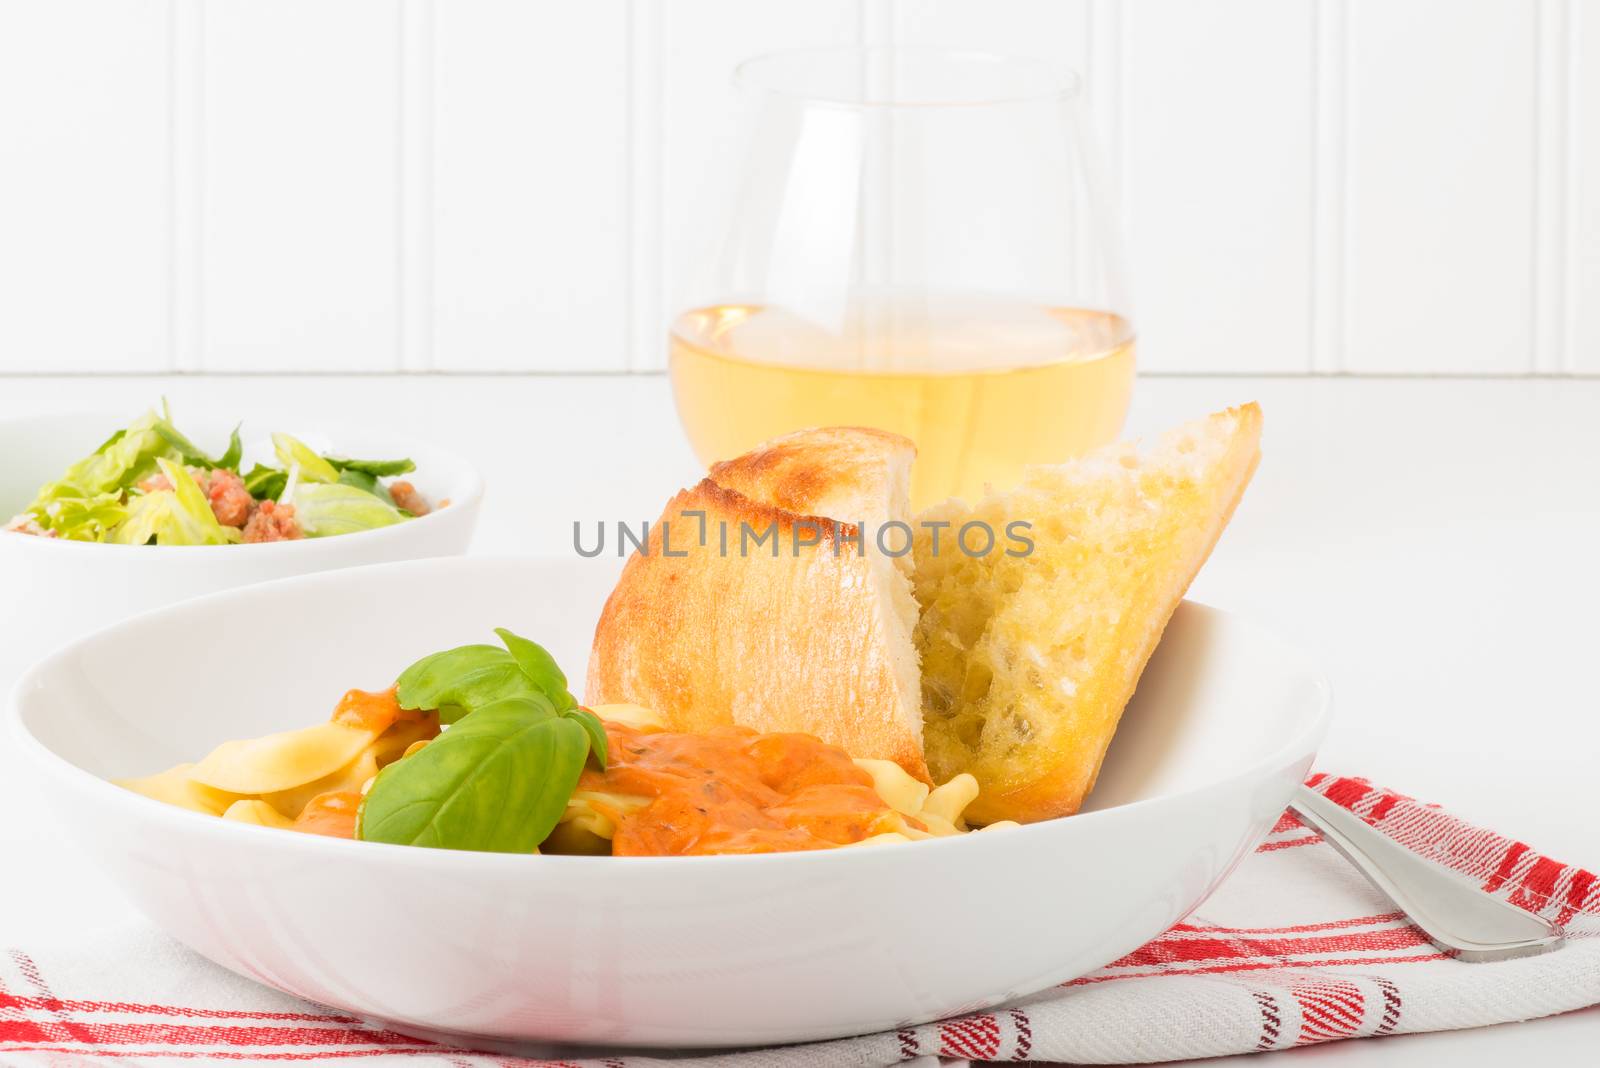 Bowl of tortelloni with caesar salad and wine.  Useful for a menu or other food service promotional materials.